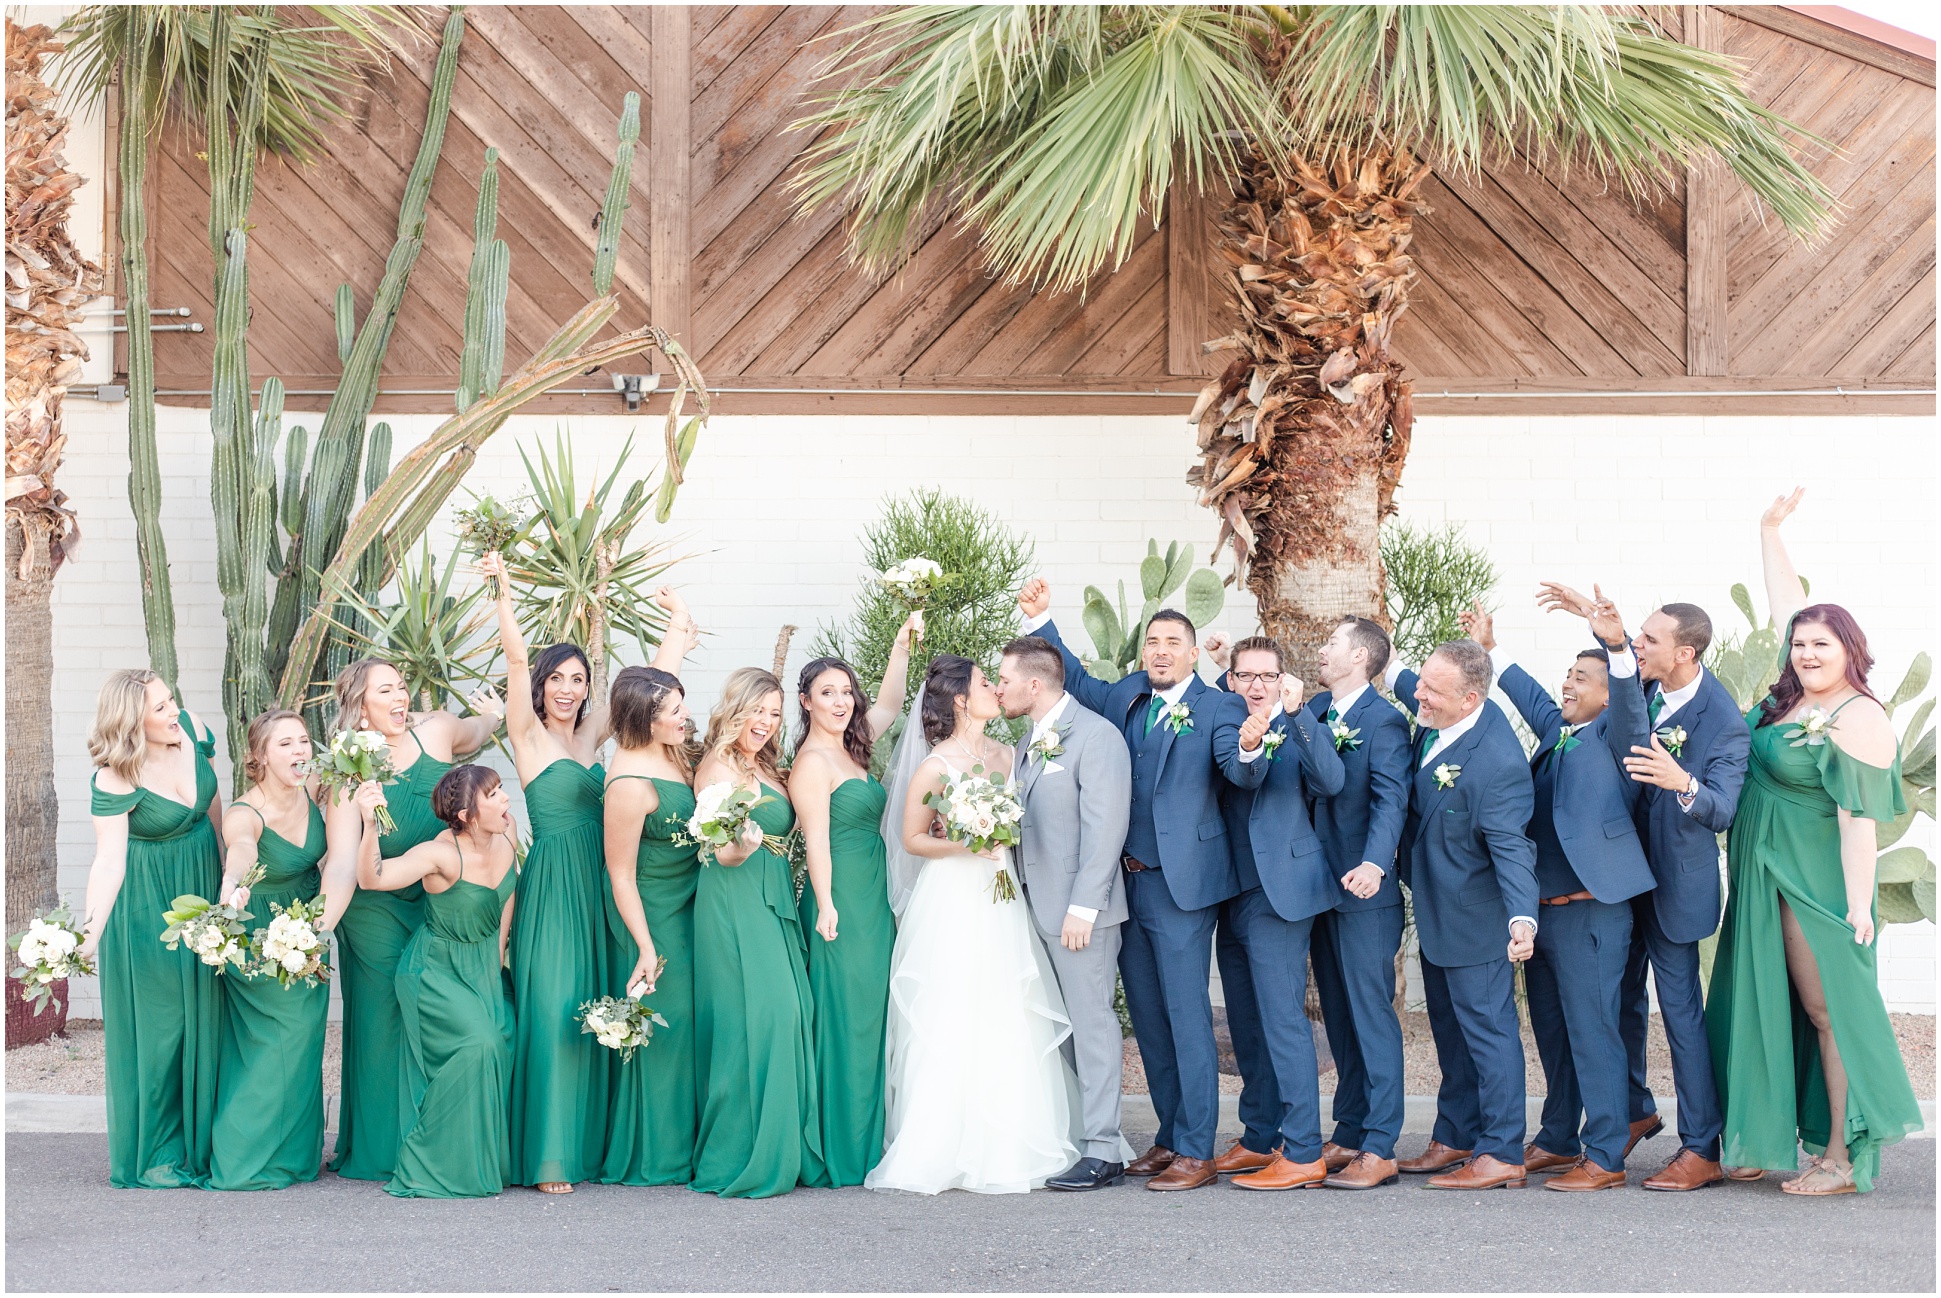 Group photo of Bride and Groom kissing with Groomsmen and Bridesmaids framing them